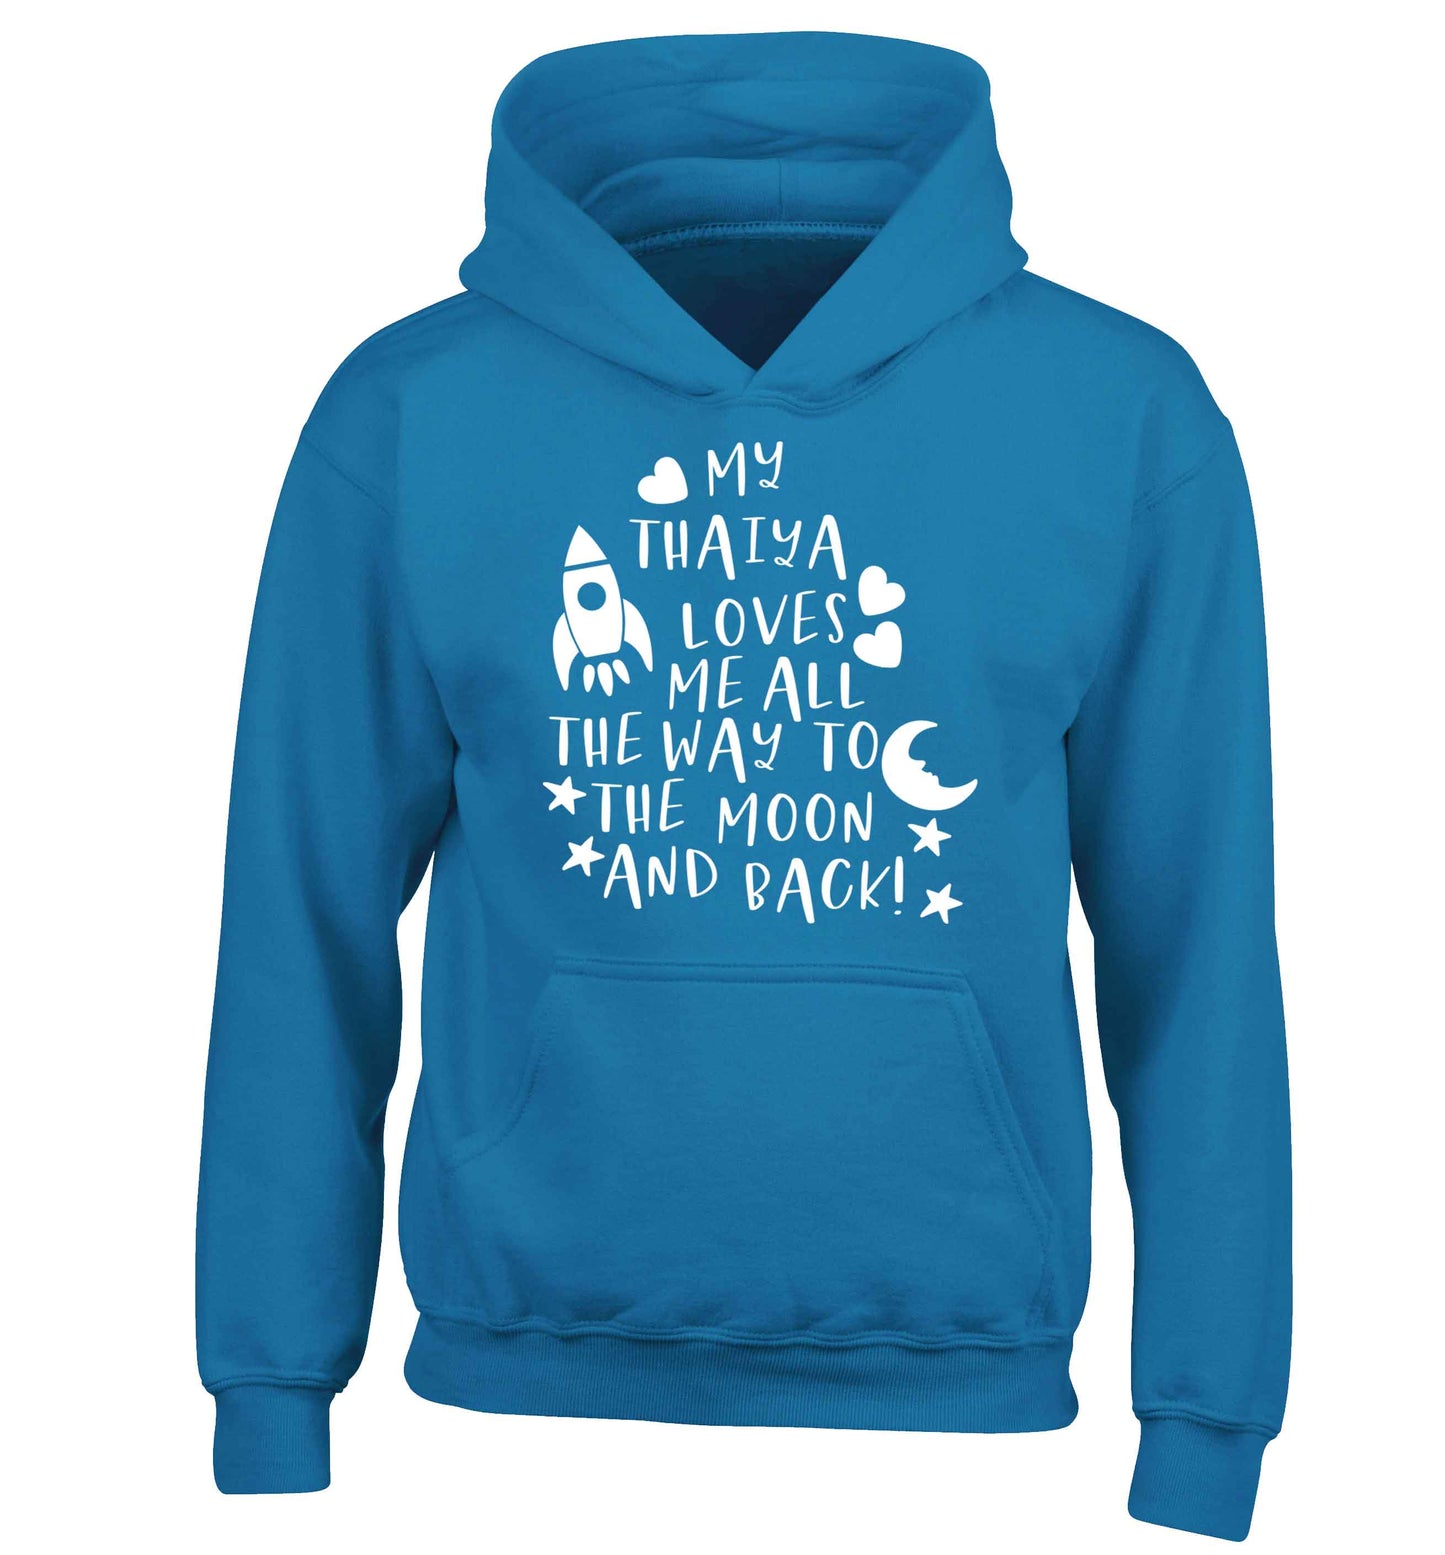 My thaiya loves me all the way to the moon and back children's blue hoodie 12-13 Years